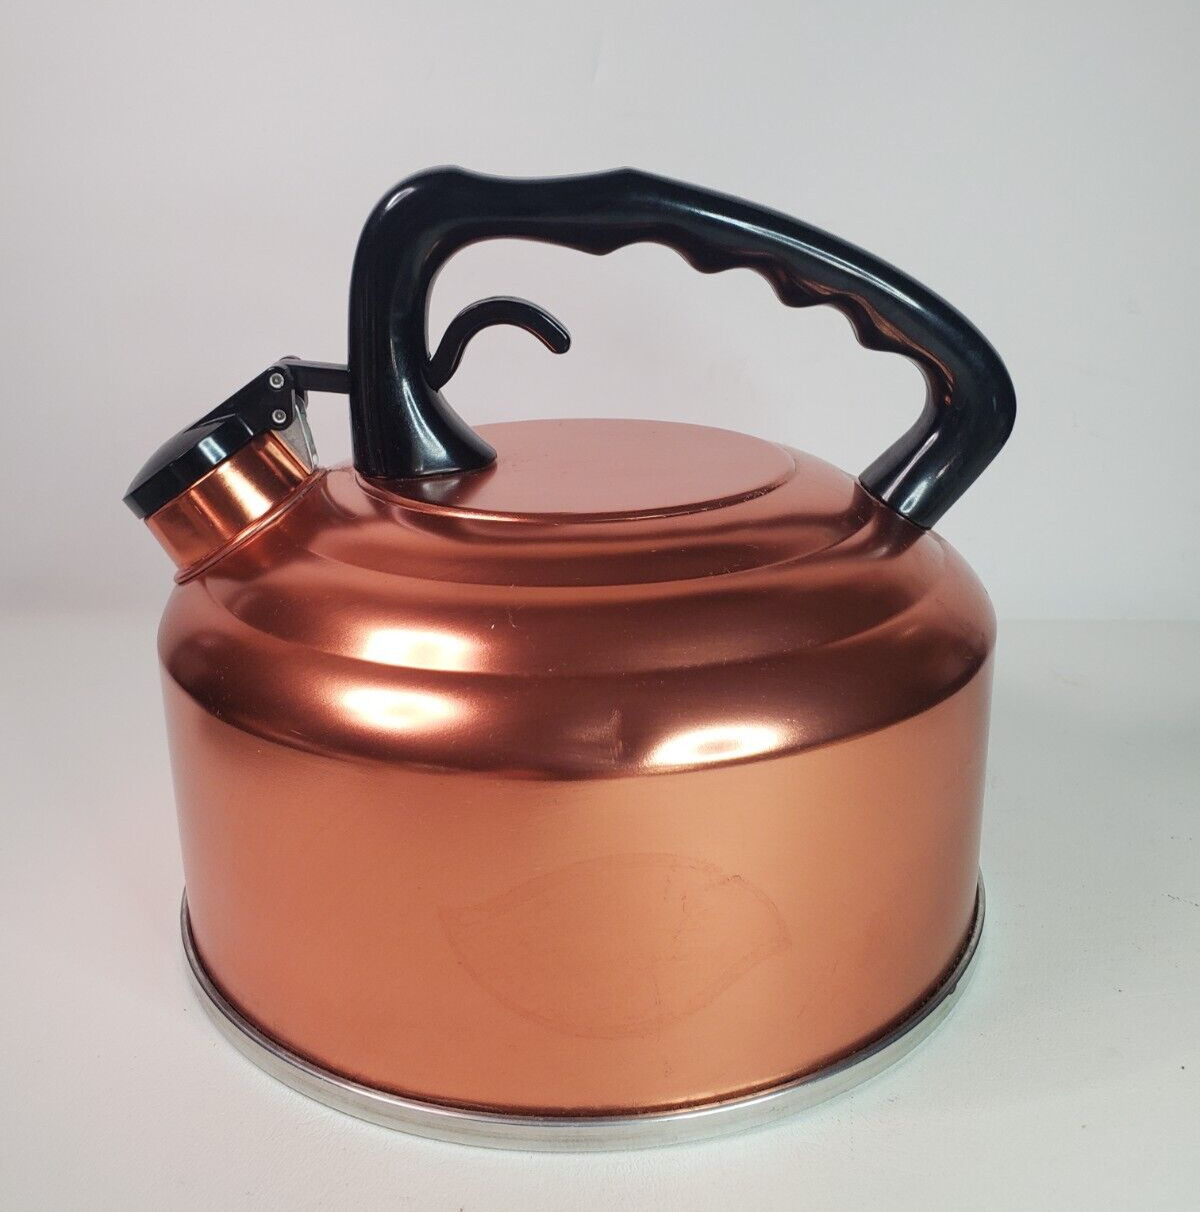 MIRRO Stovetop Kettle Whistler Tea Hot Water Coffee Copper Color Vintage USA